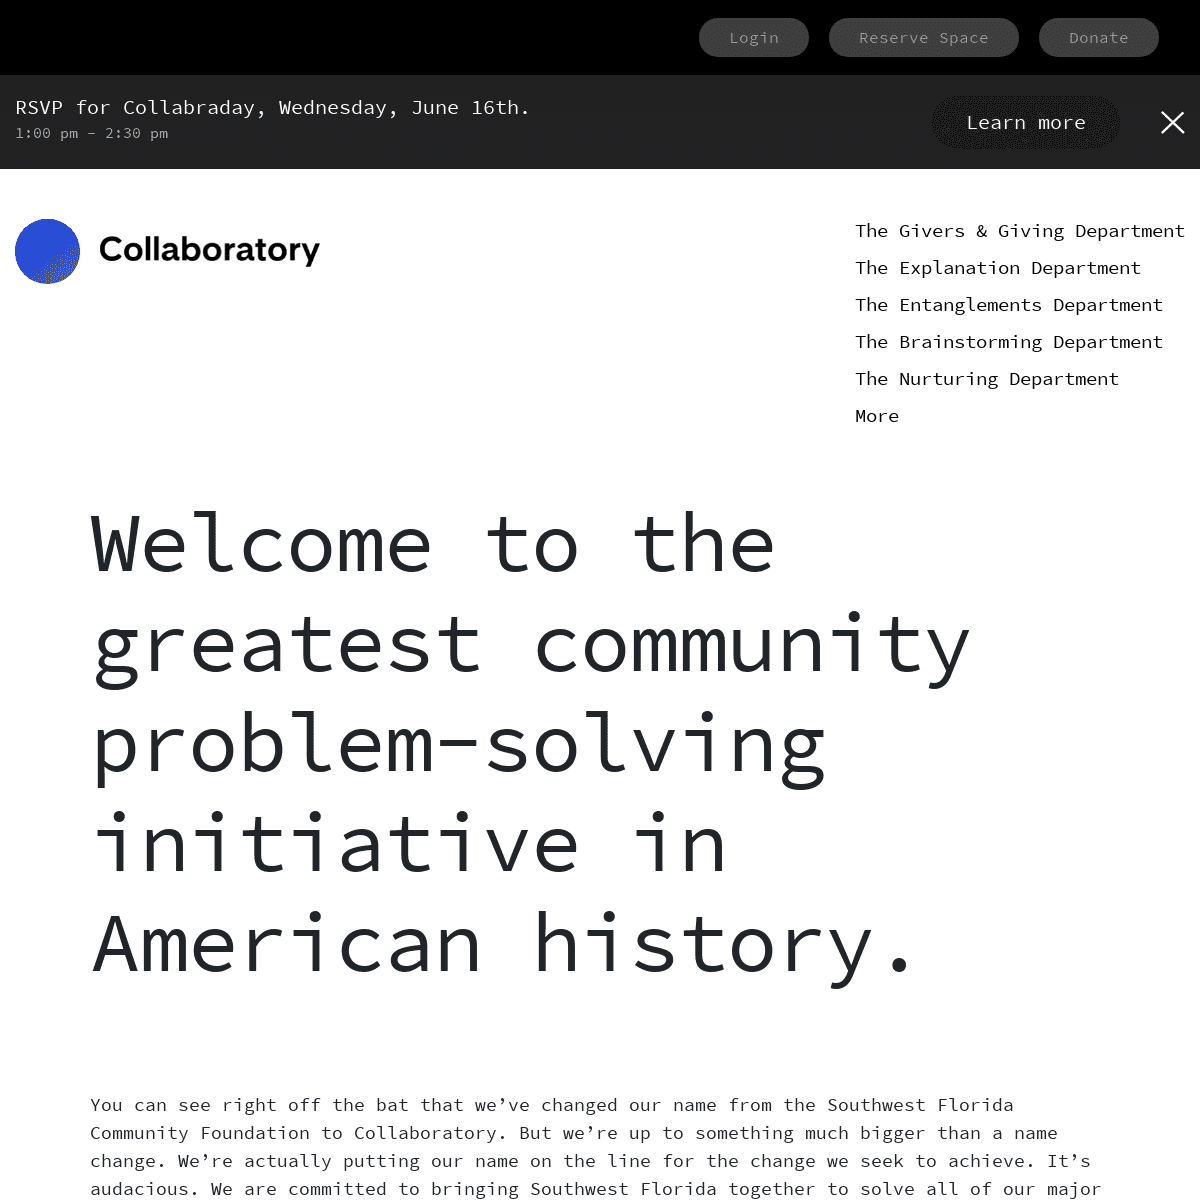 Welcome to the greatest community problem-solving initiative in American history. - Collaboratory